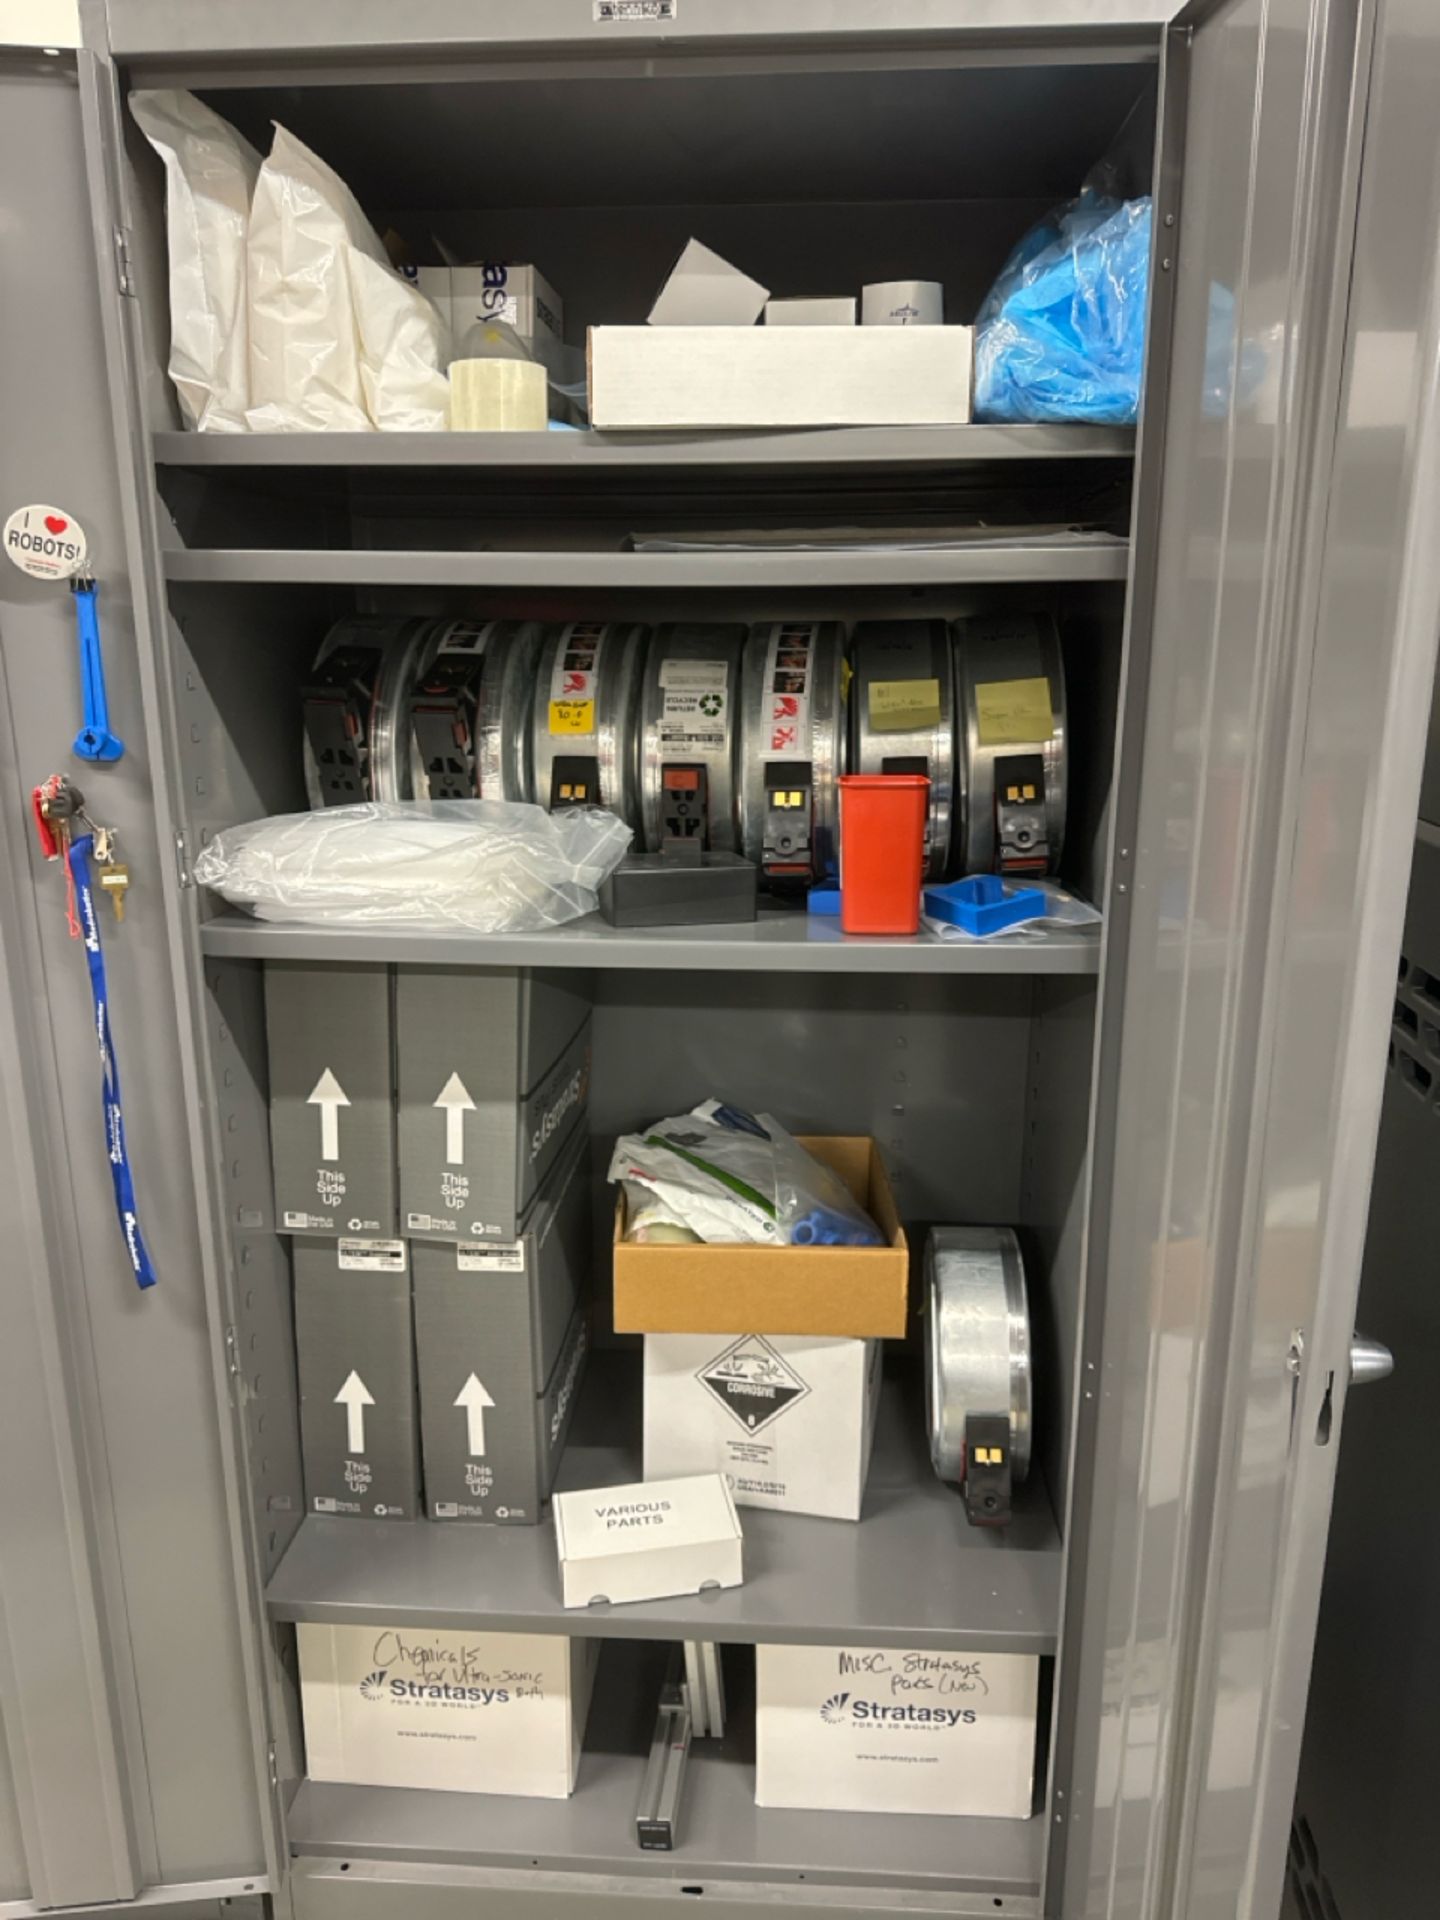 Stratasys Fortus 450mc 3D Production System Printer w/ Contents of Utility Cabinet - Image 7 of 17